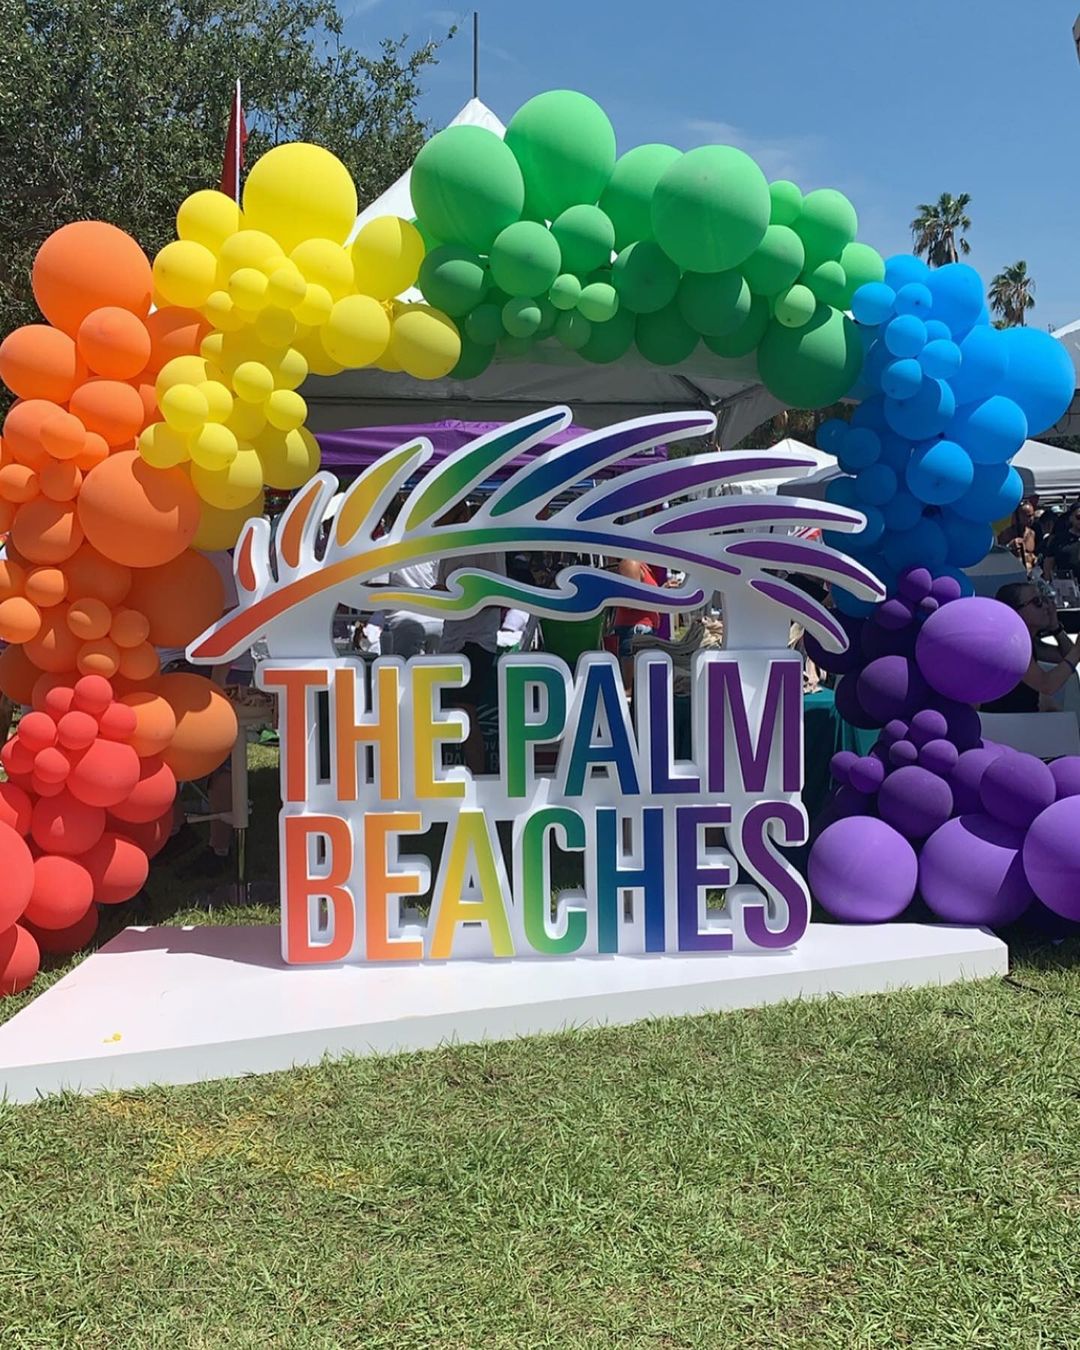 Pride Sign Set Up During Palm Beach Pride. Photo by Instagram user @mary_candi